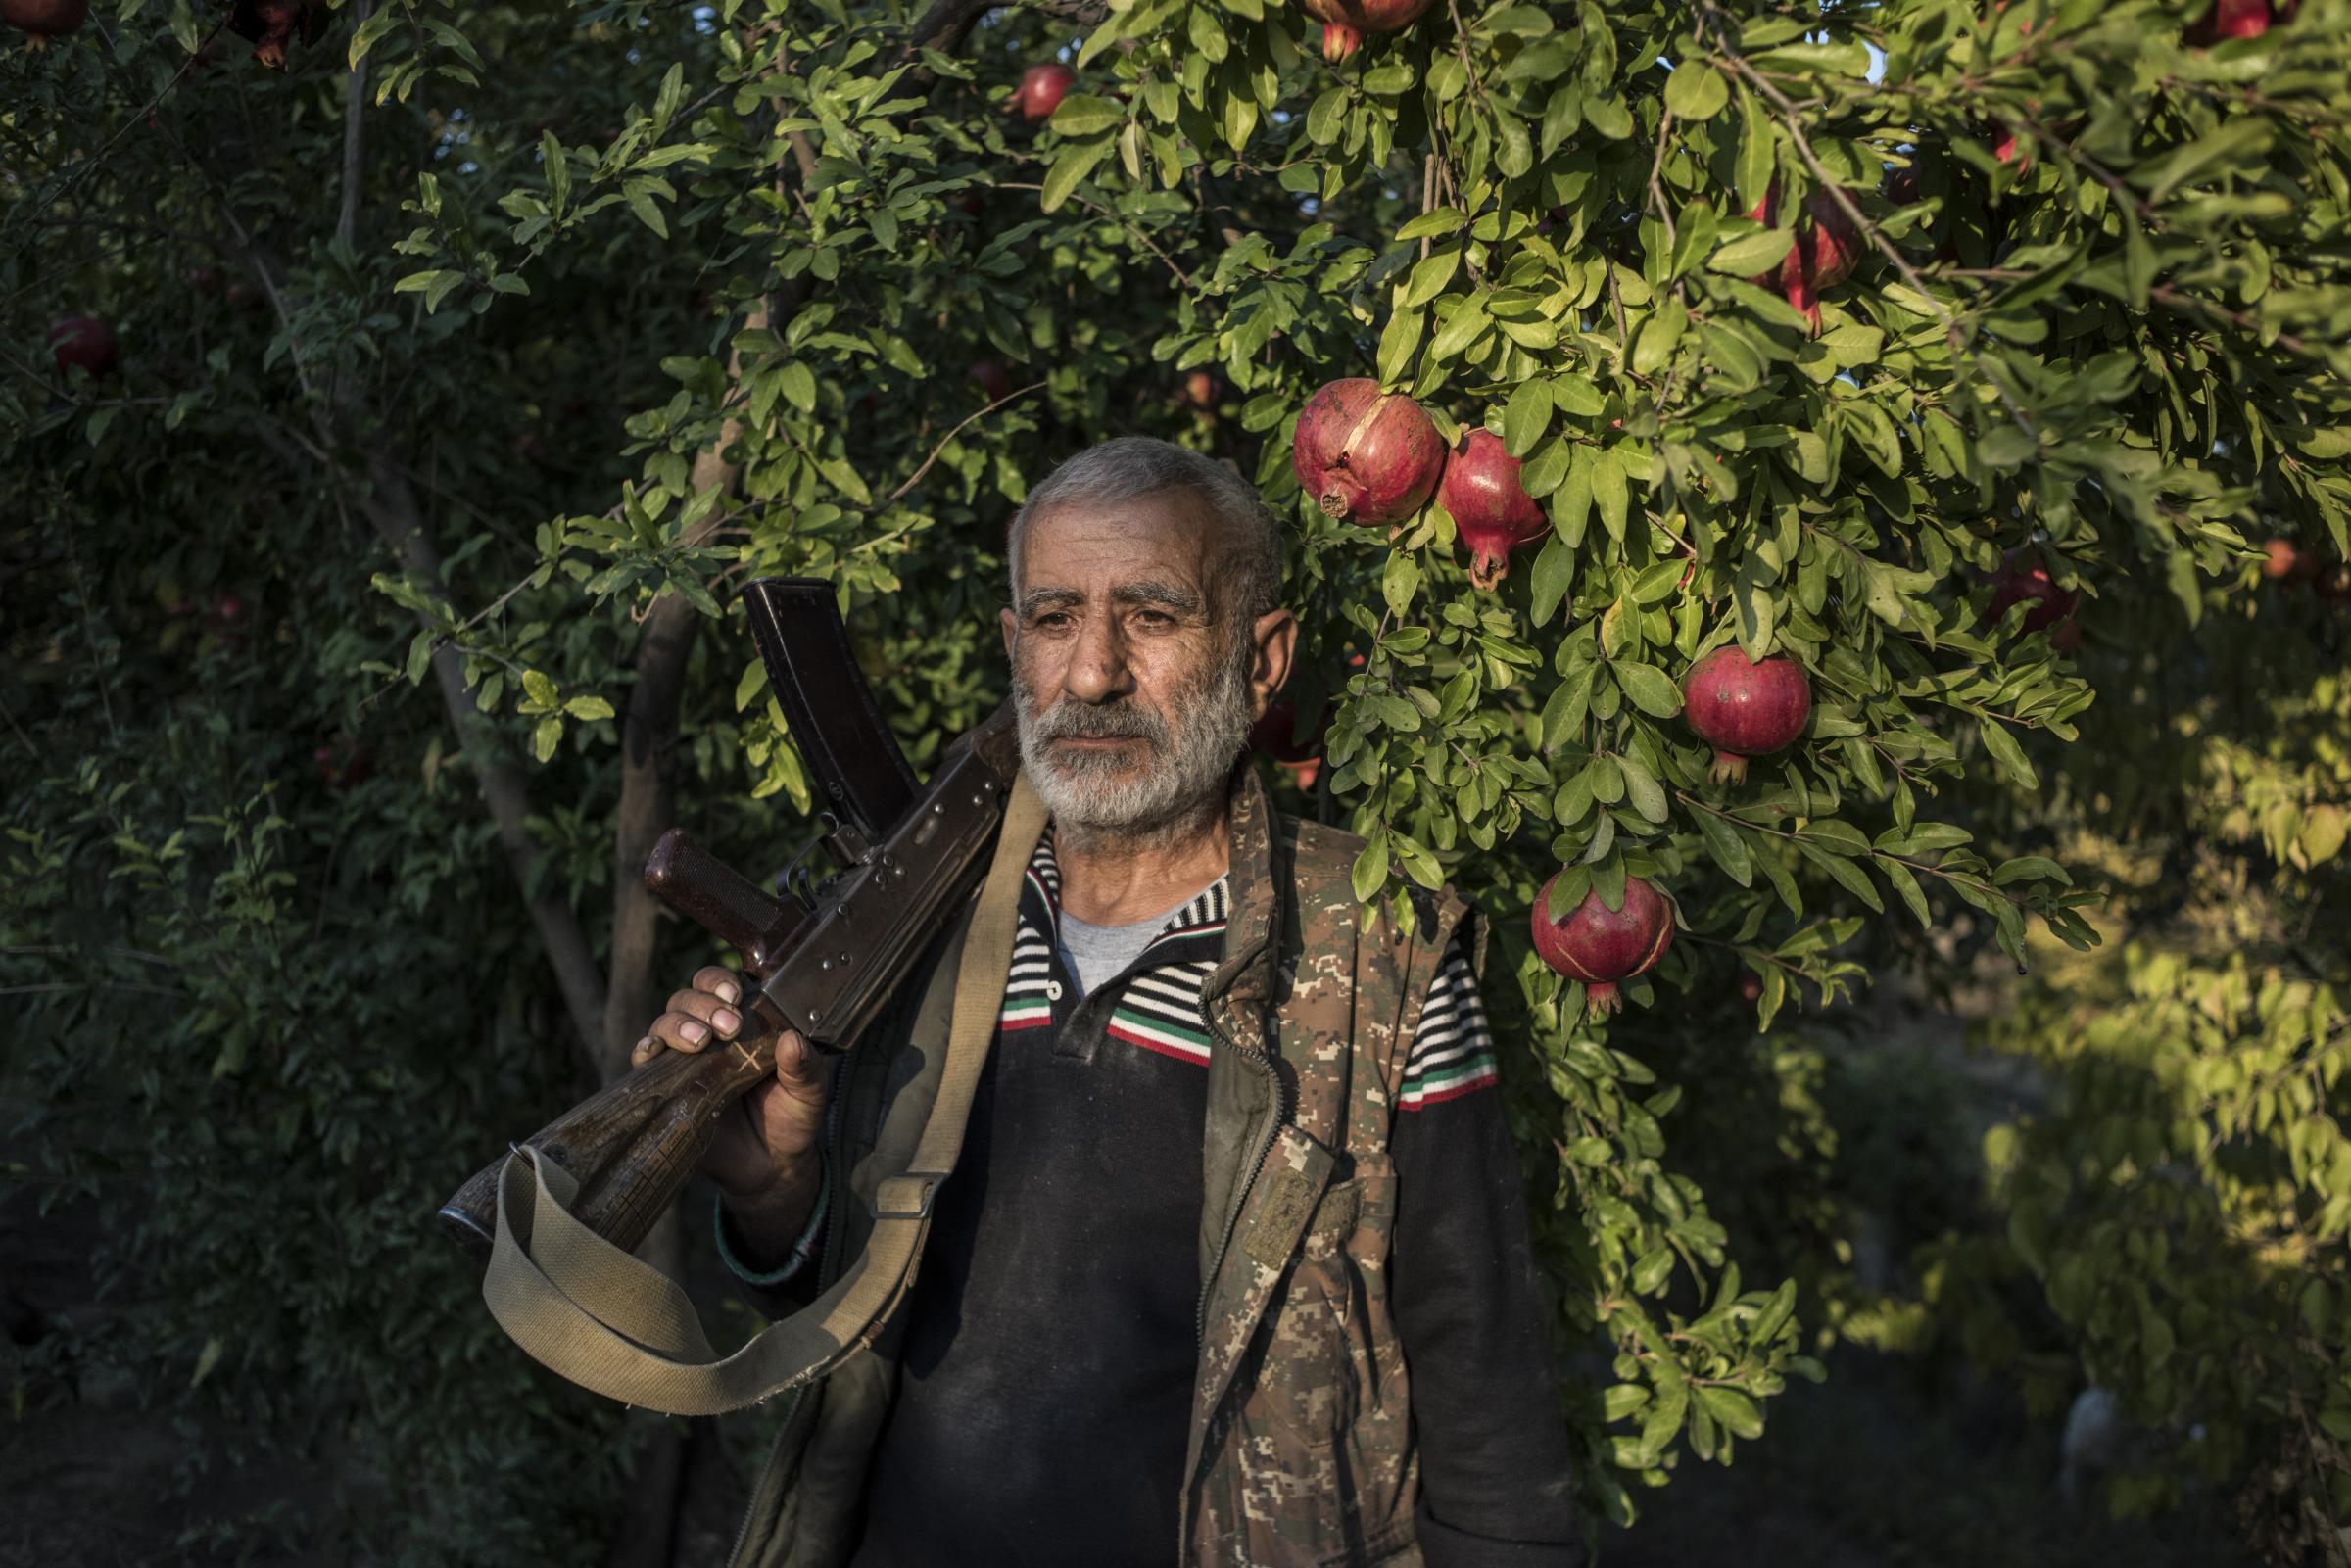 Paradise Lost - A local resident Anushavan (62) stands in a pomegranate garden in the yard of his house.He is...